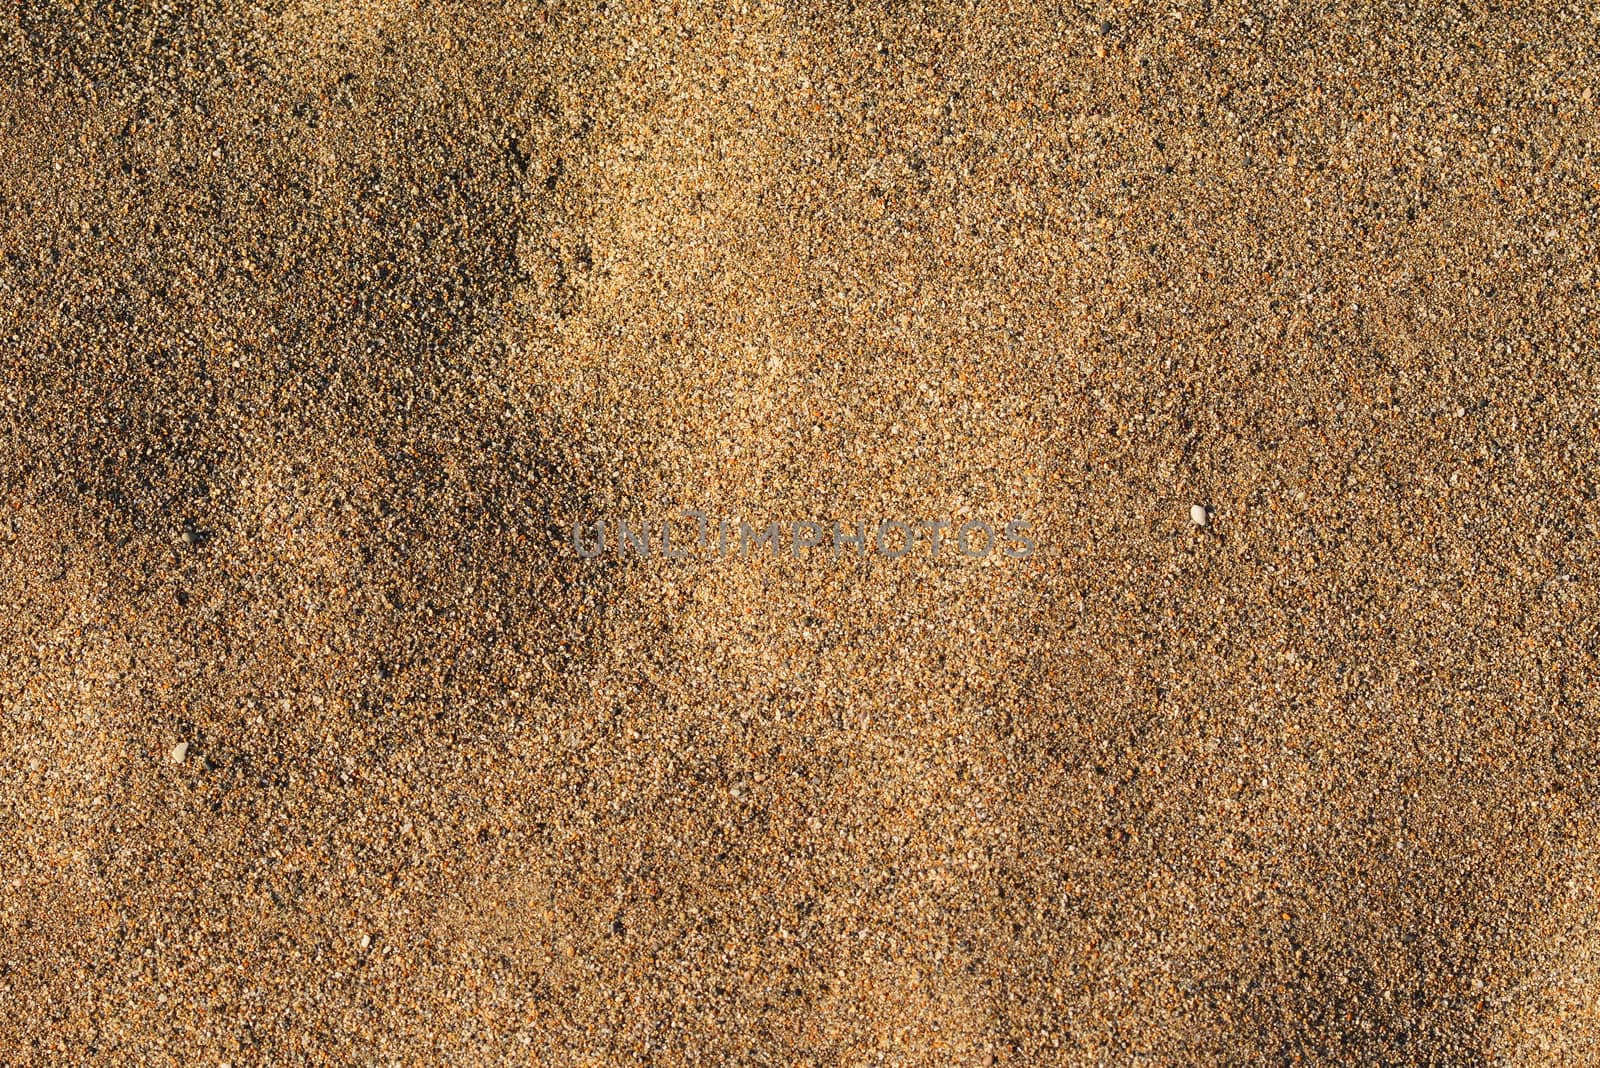 Yellow sand surface. Close up natural background